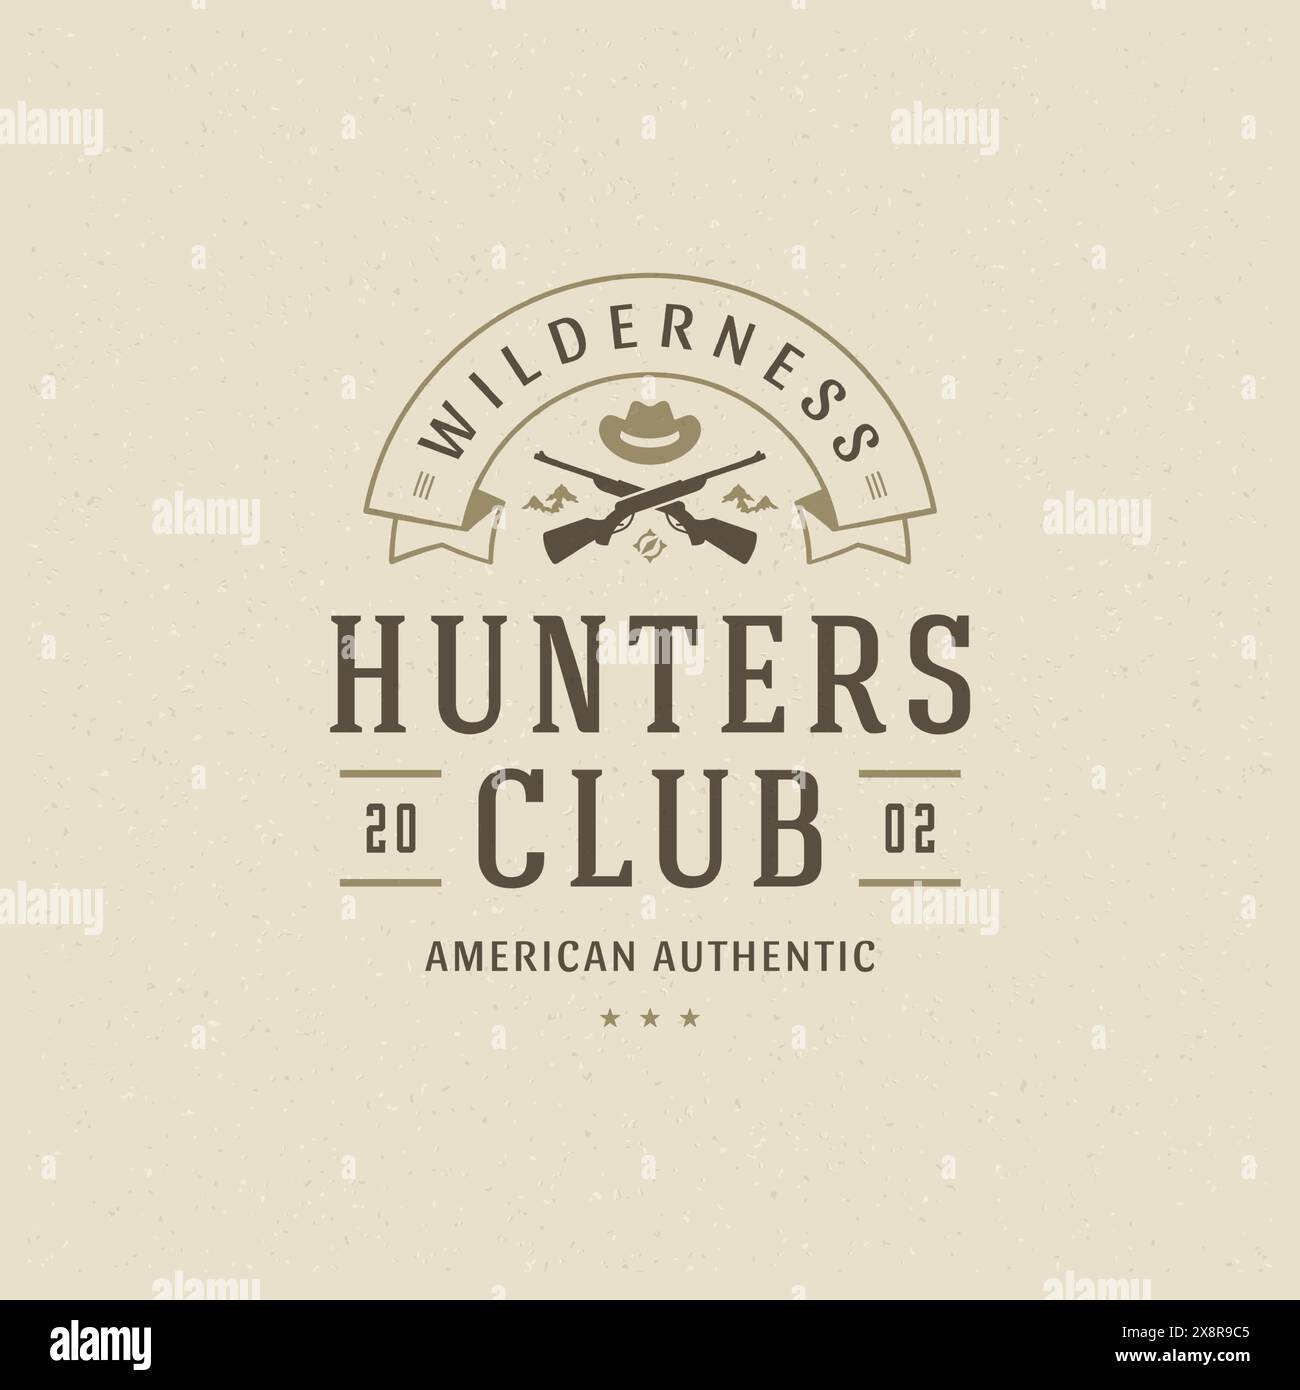 Hunters club logo emblem vector illustration. Outdoor adventure leisure, Rifles and hat silhouettes shirt, print stamp. Vintage typography badge desig Stock Vector